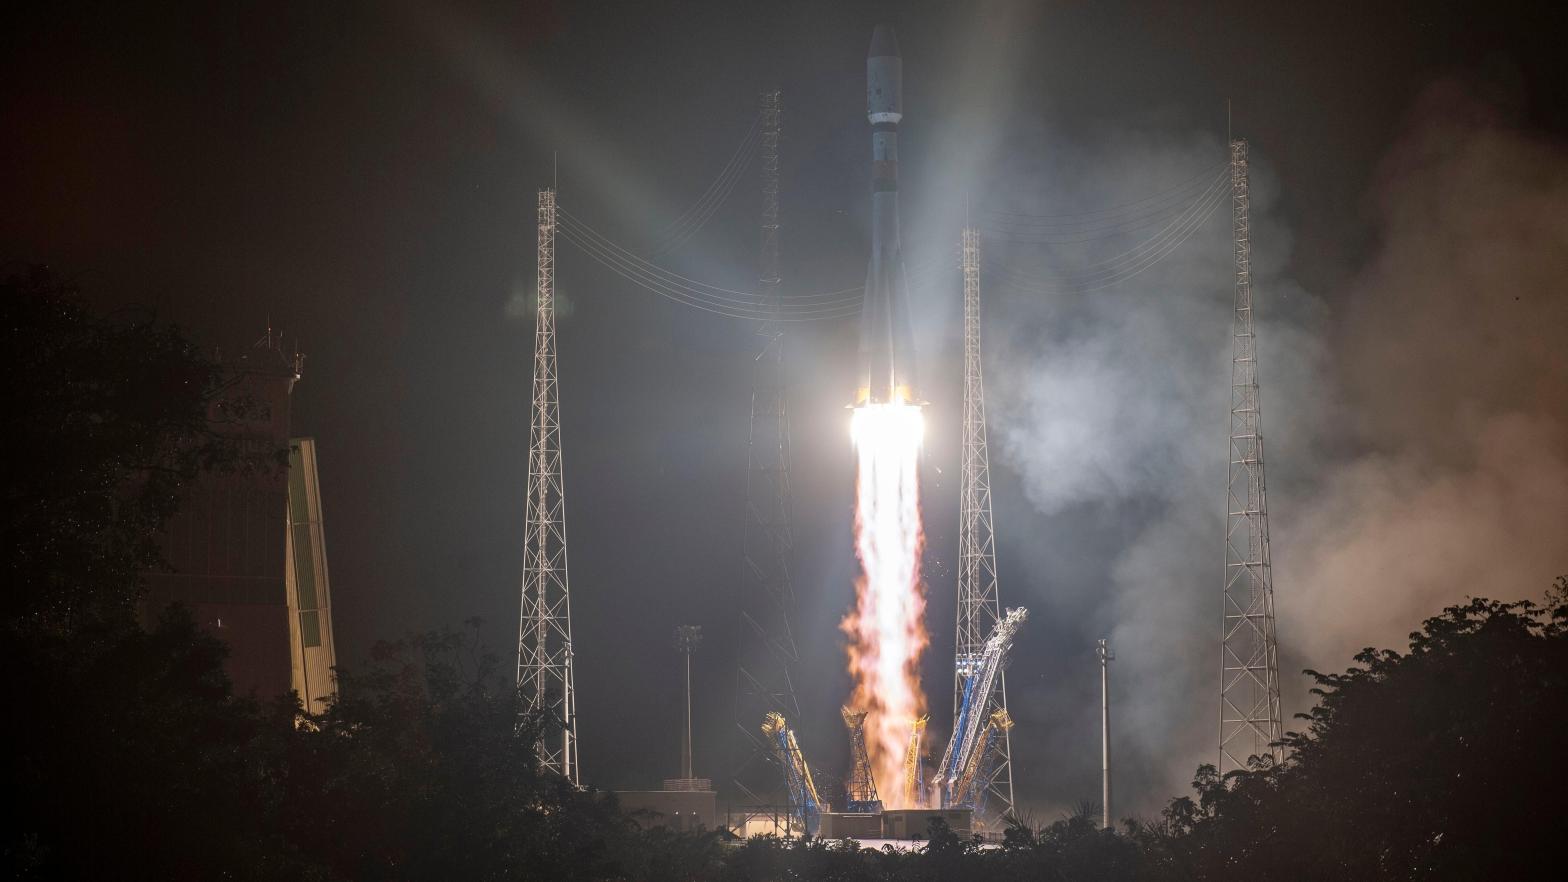 OneWeb has had to put off launching its satellites aboard Russian Soyuz rockets. (Photo: JM GUILLON, AP)